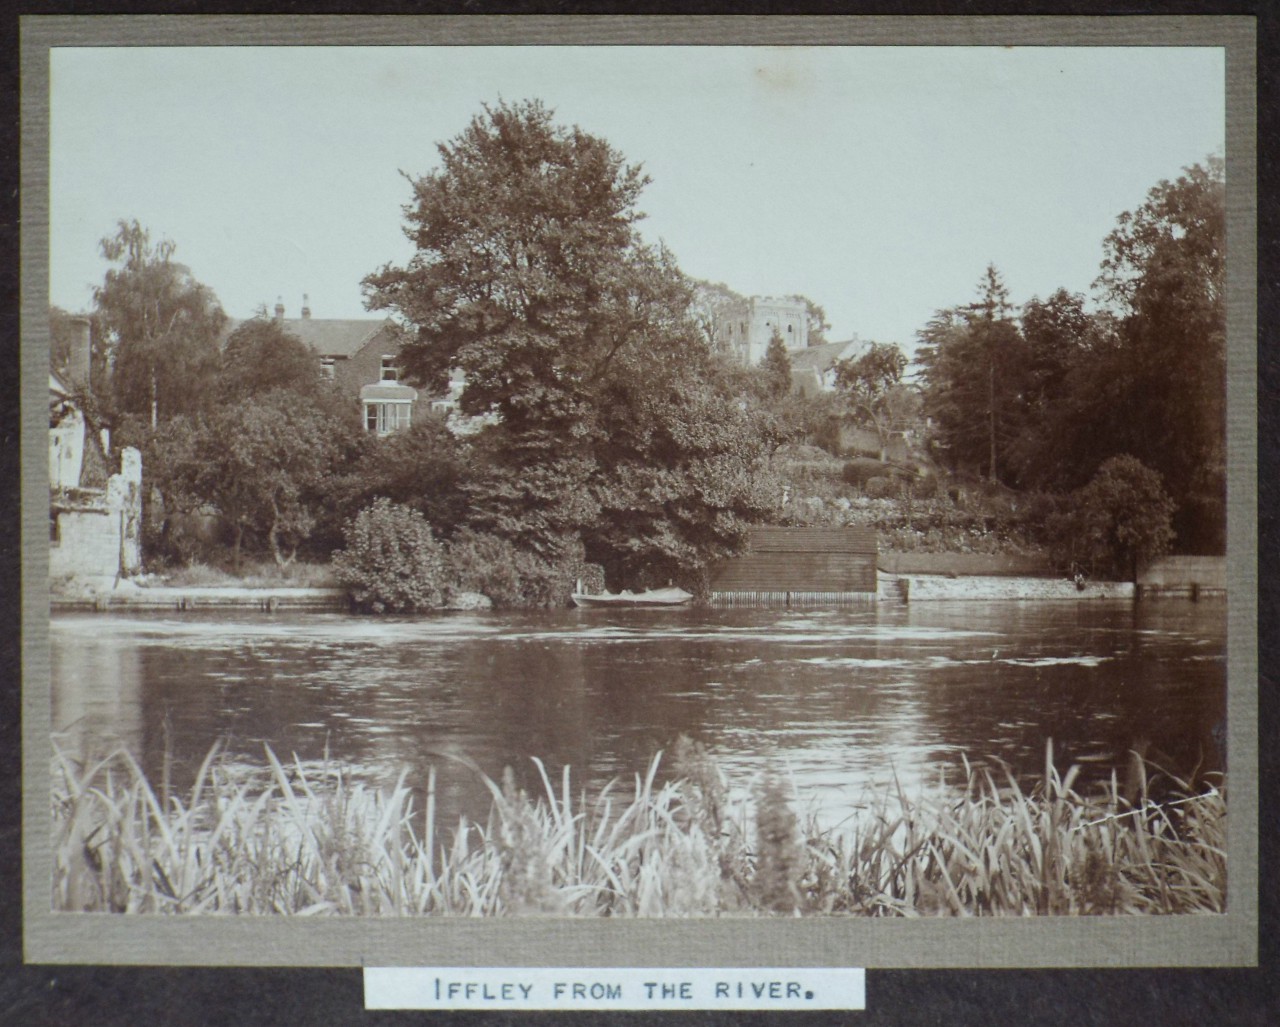 Photograph - Iffley from the River.